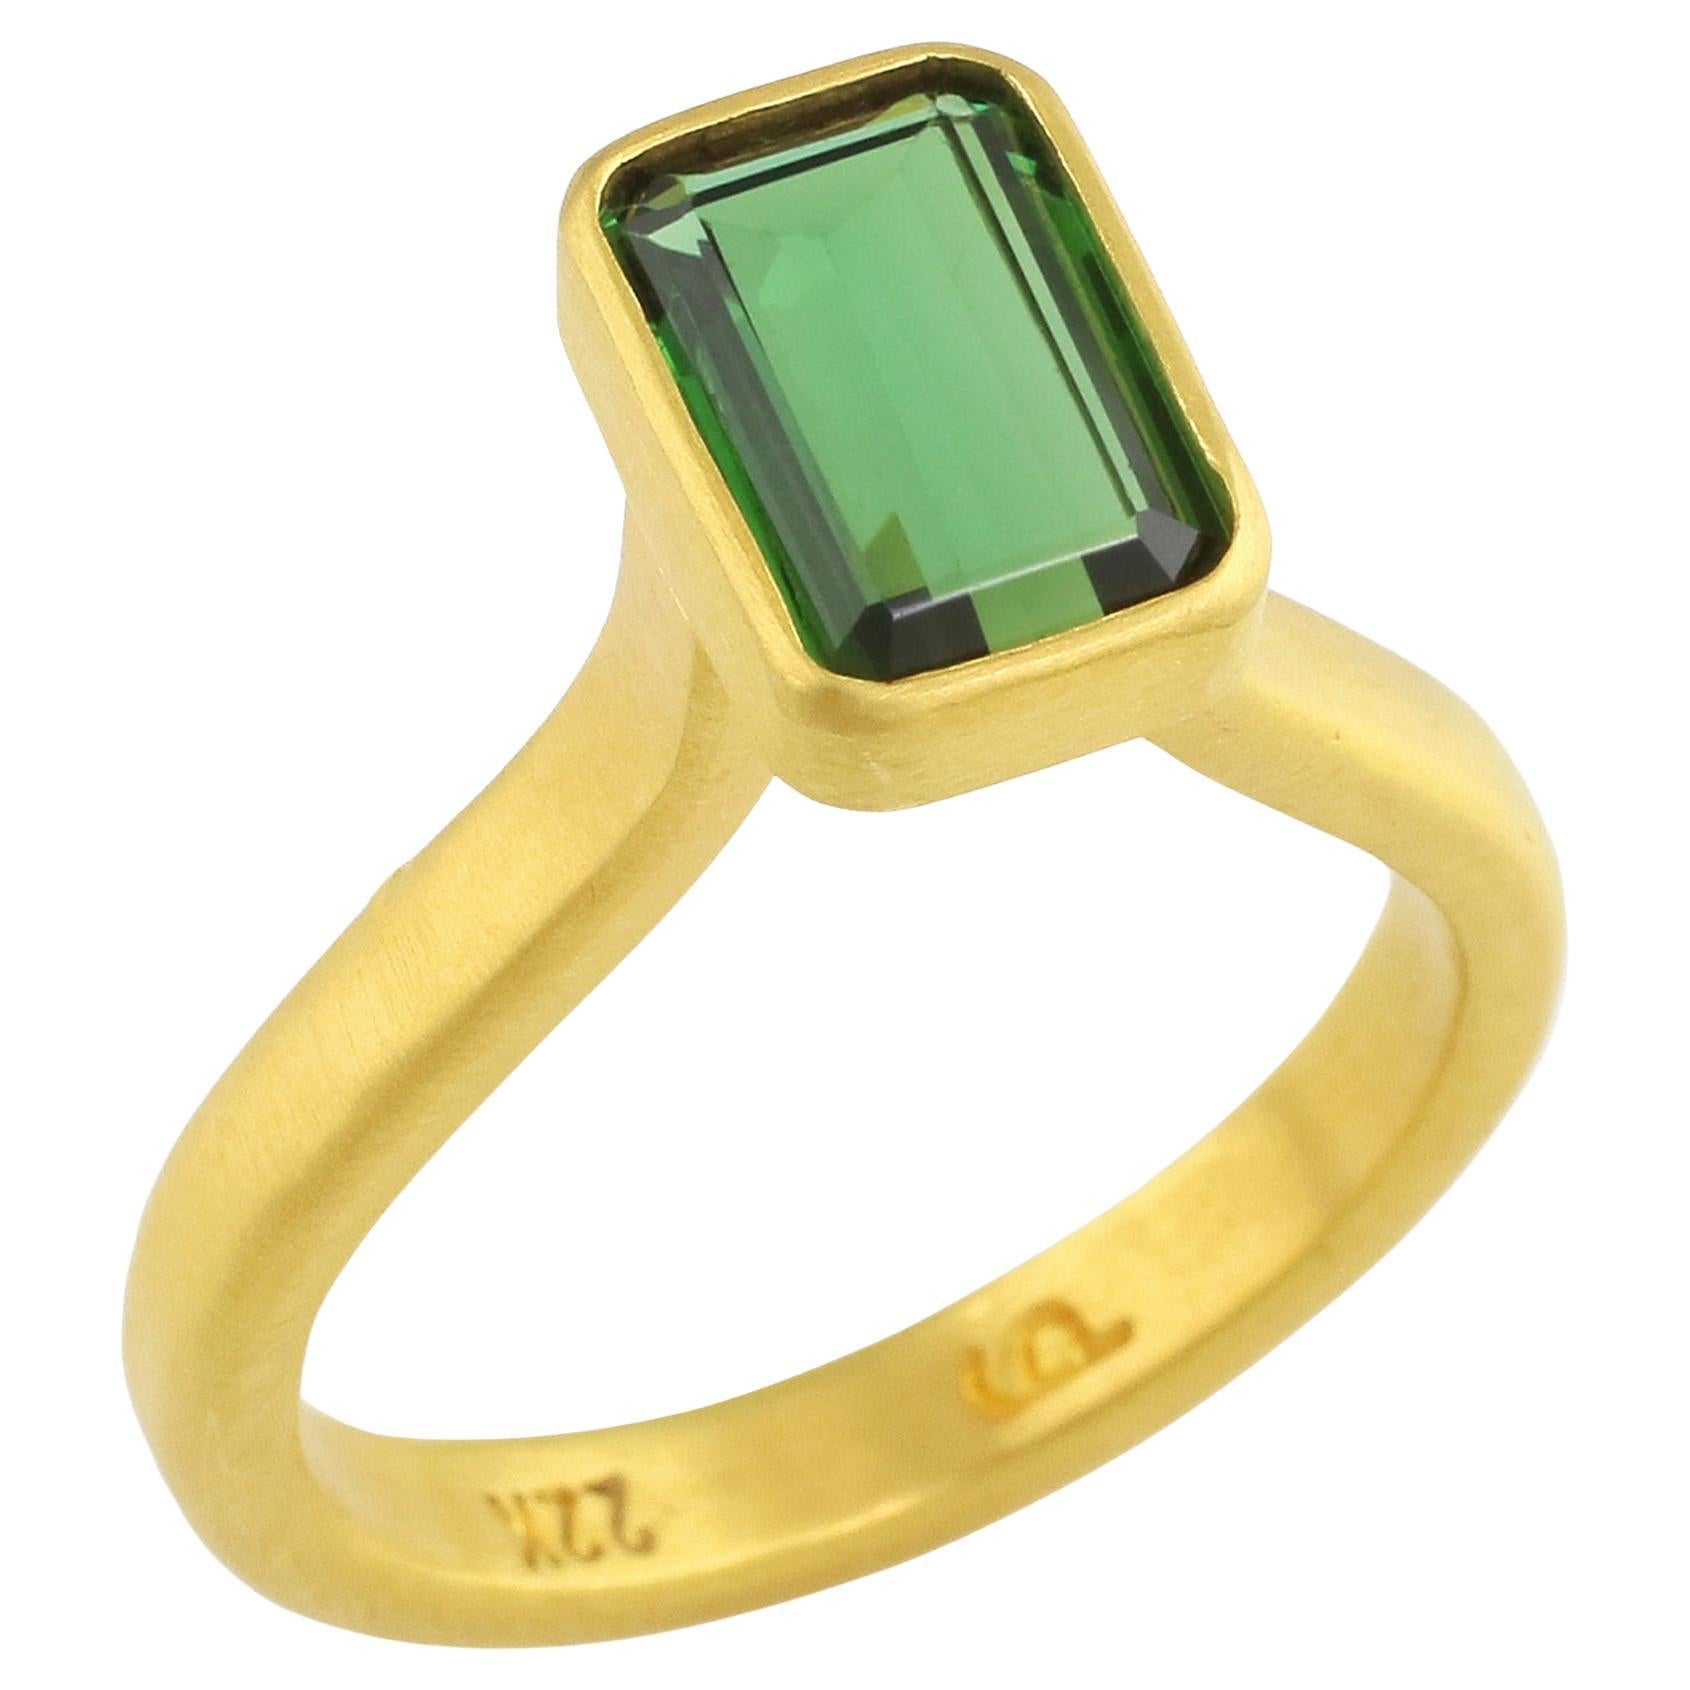 PHILIPPE SPENCER 1.7 Ct. Extra-Fine Tourmaline Statement Ring in 22K Gold For Sale